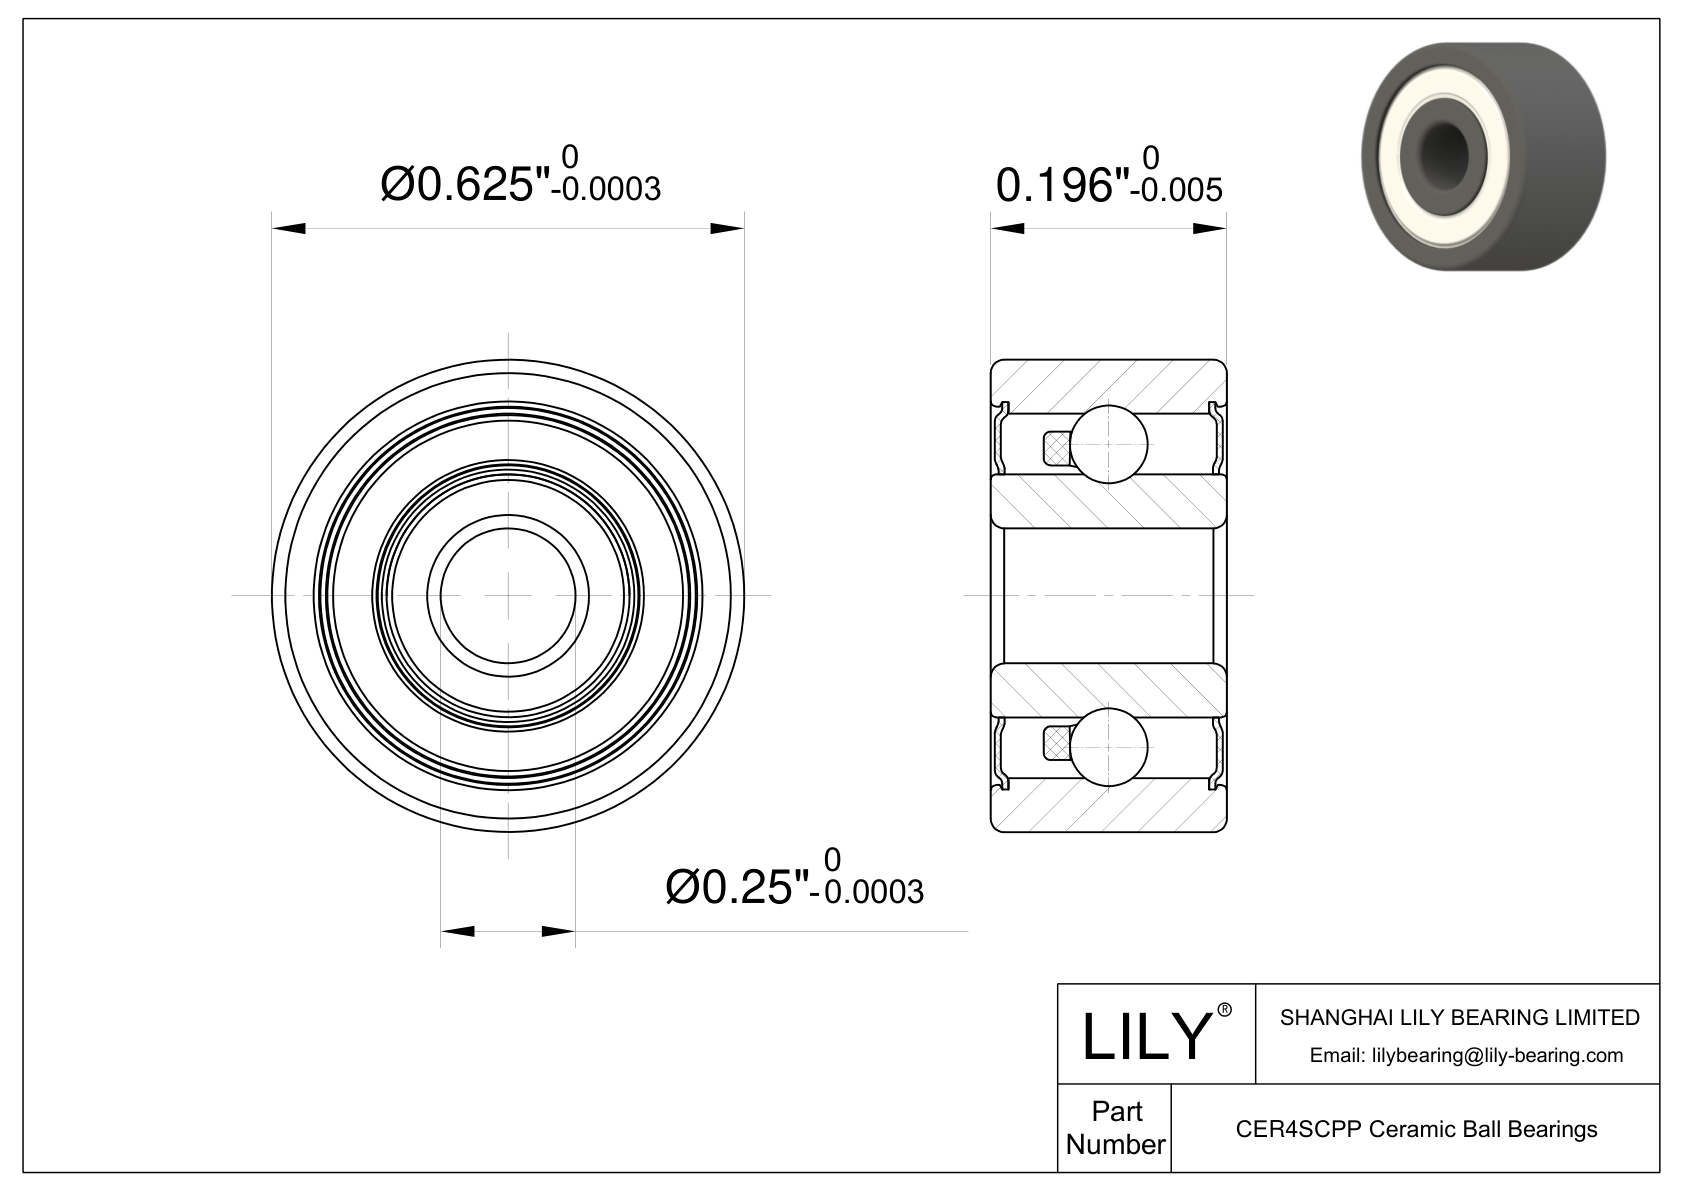 CESC R4 2RS Inch Size Silicon Carbide Ceramic Bearings cad drawing